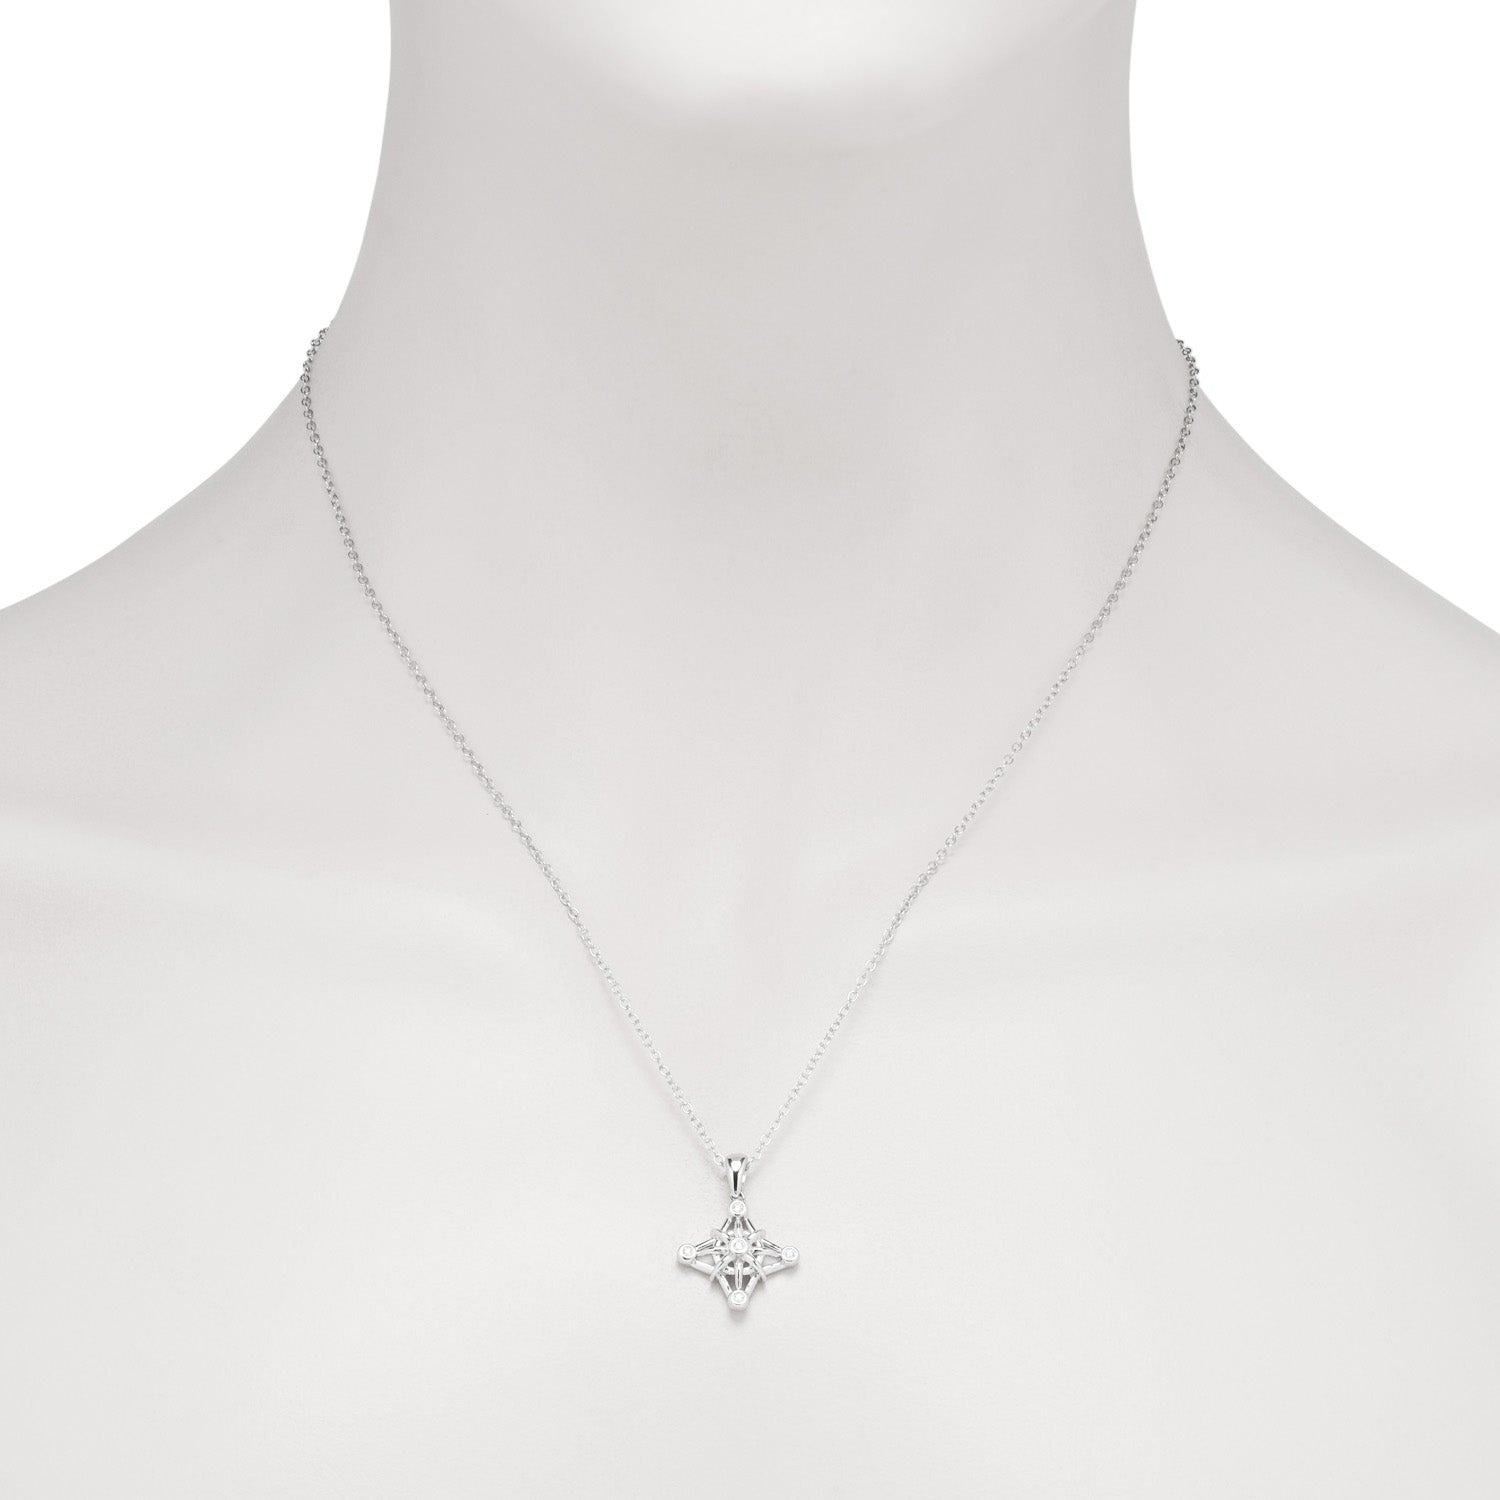 Northern Star Diamond Celestial Collection Necklace in Sterling Silver (1/20ct tw)